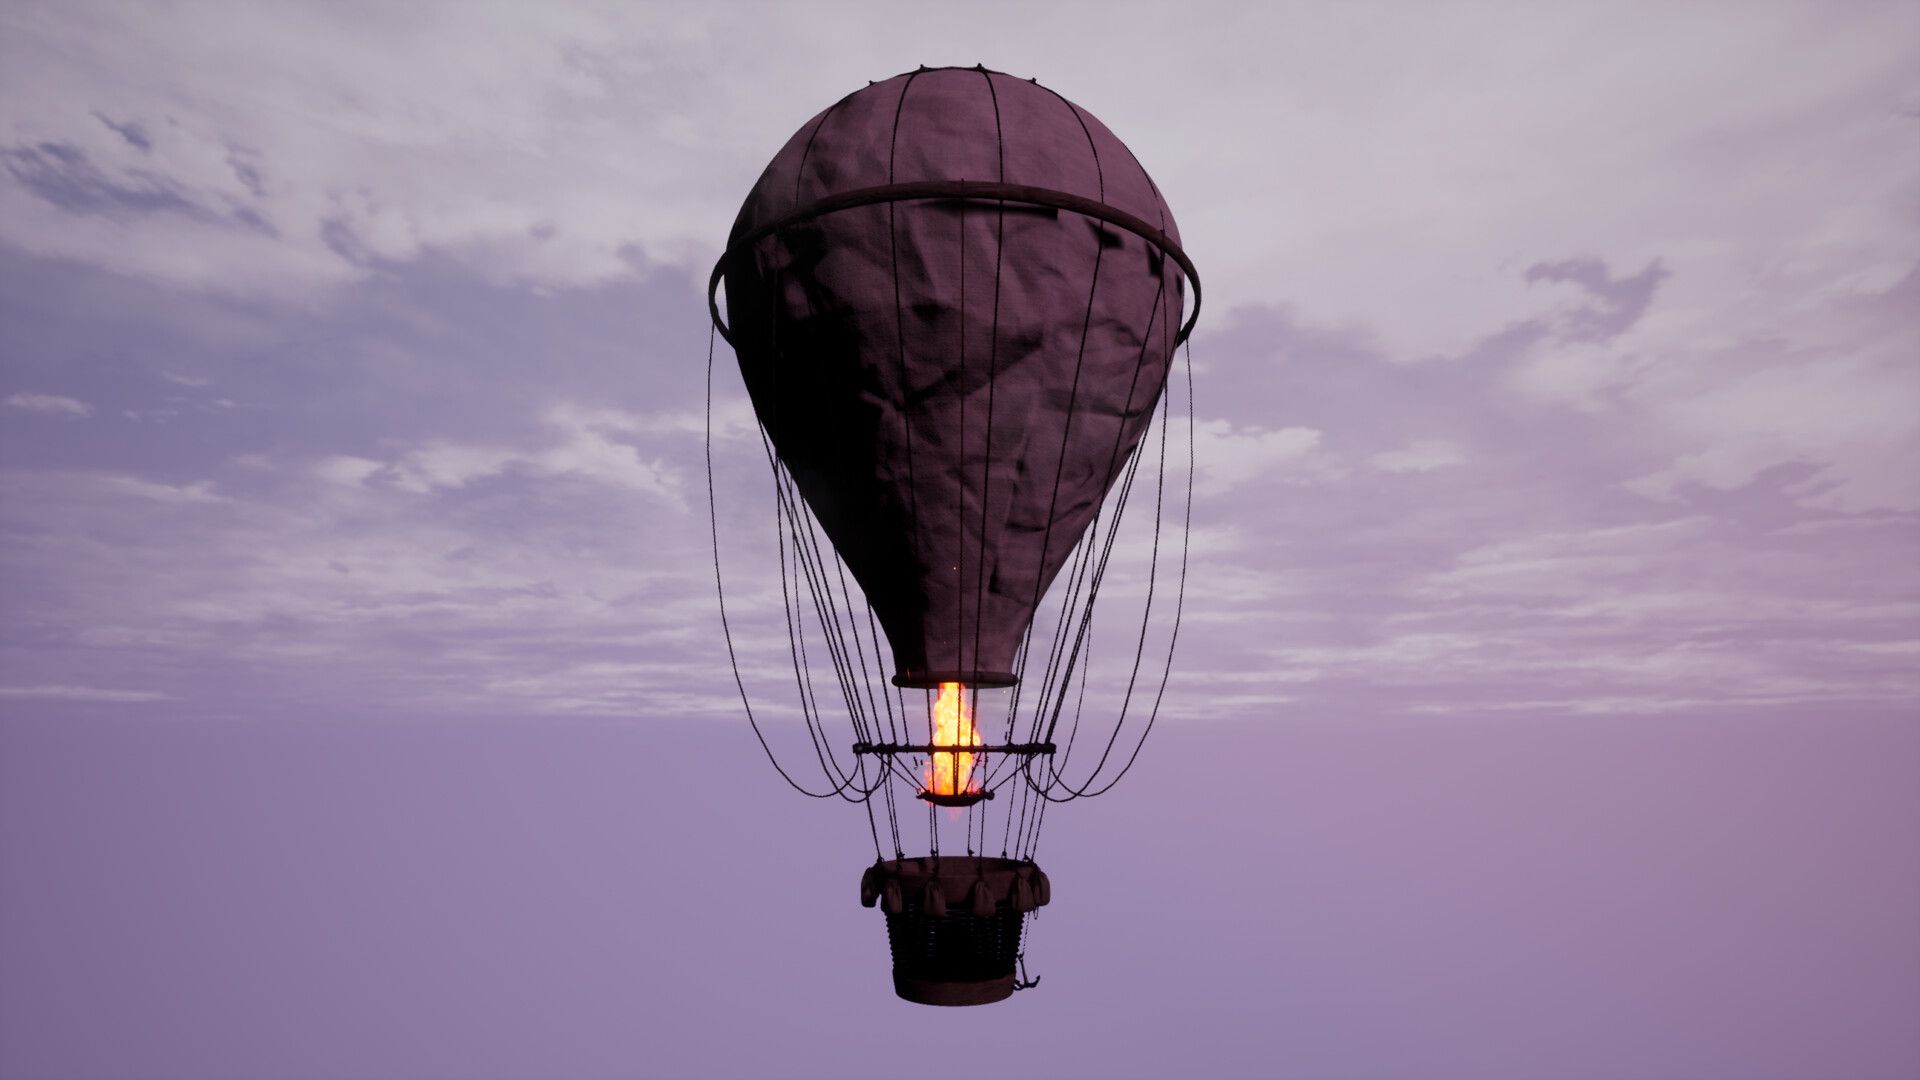 A hot air balloon floating in the sky. - Hot air balloons